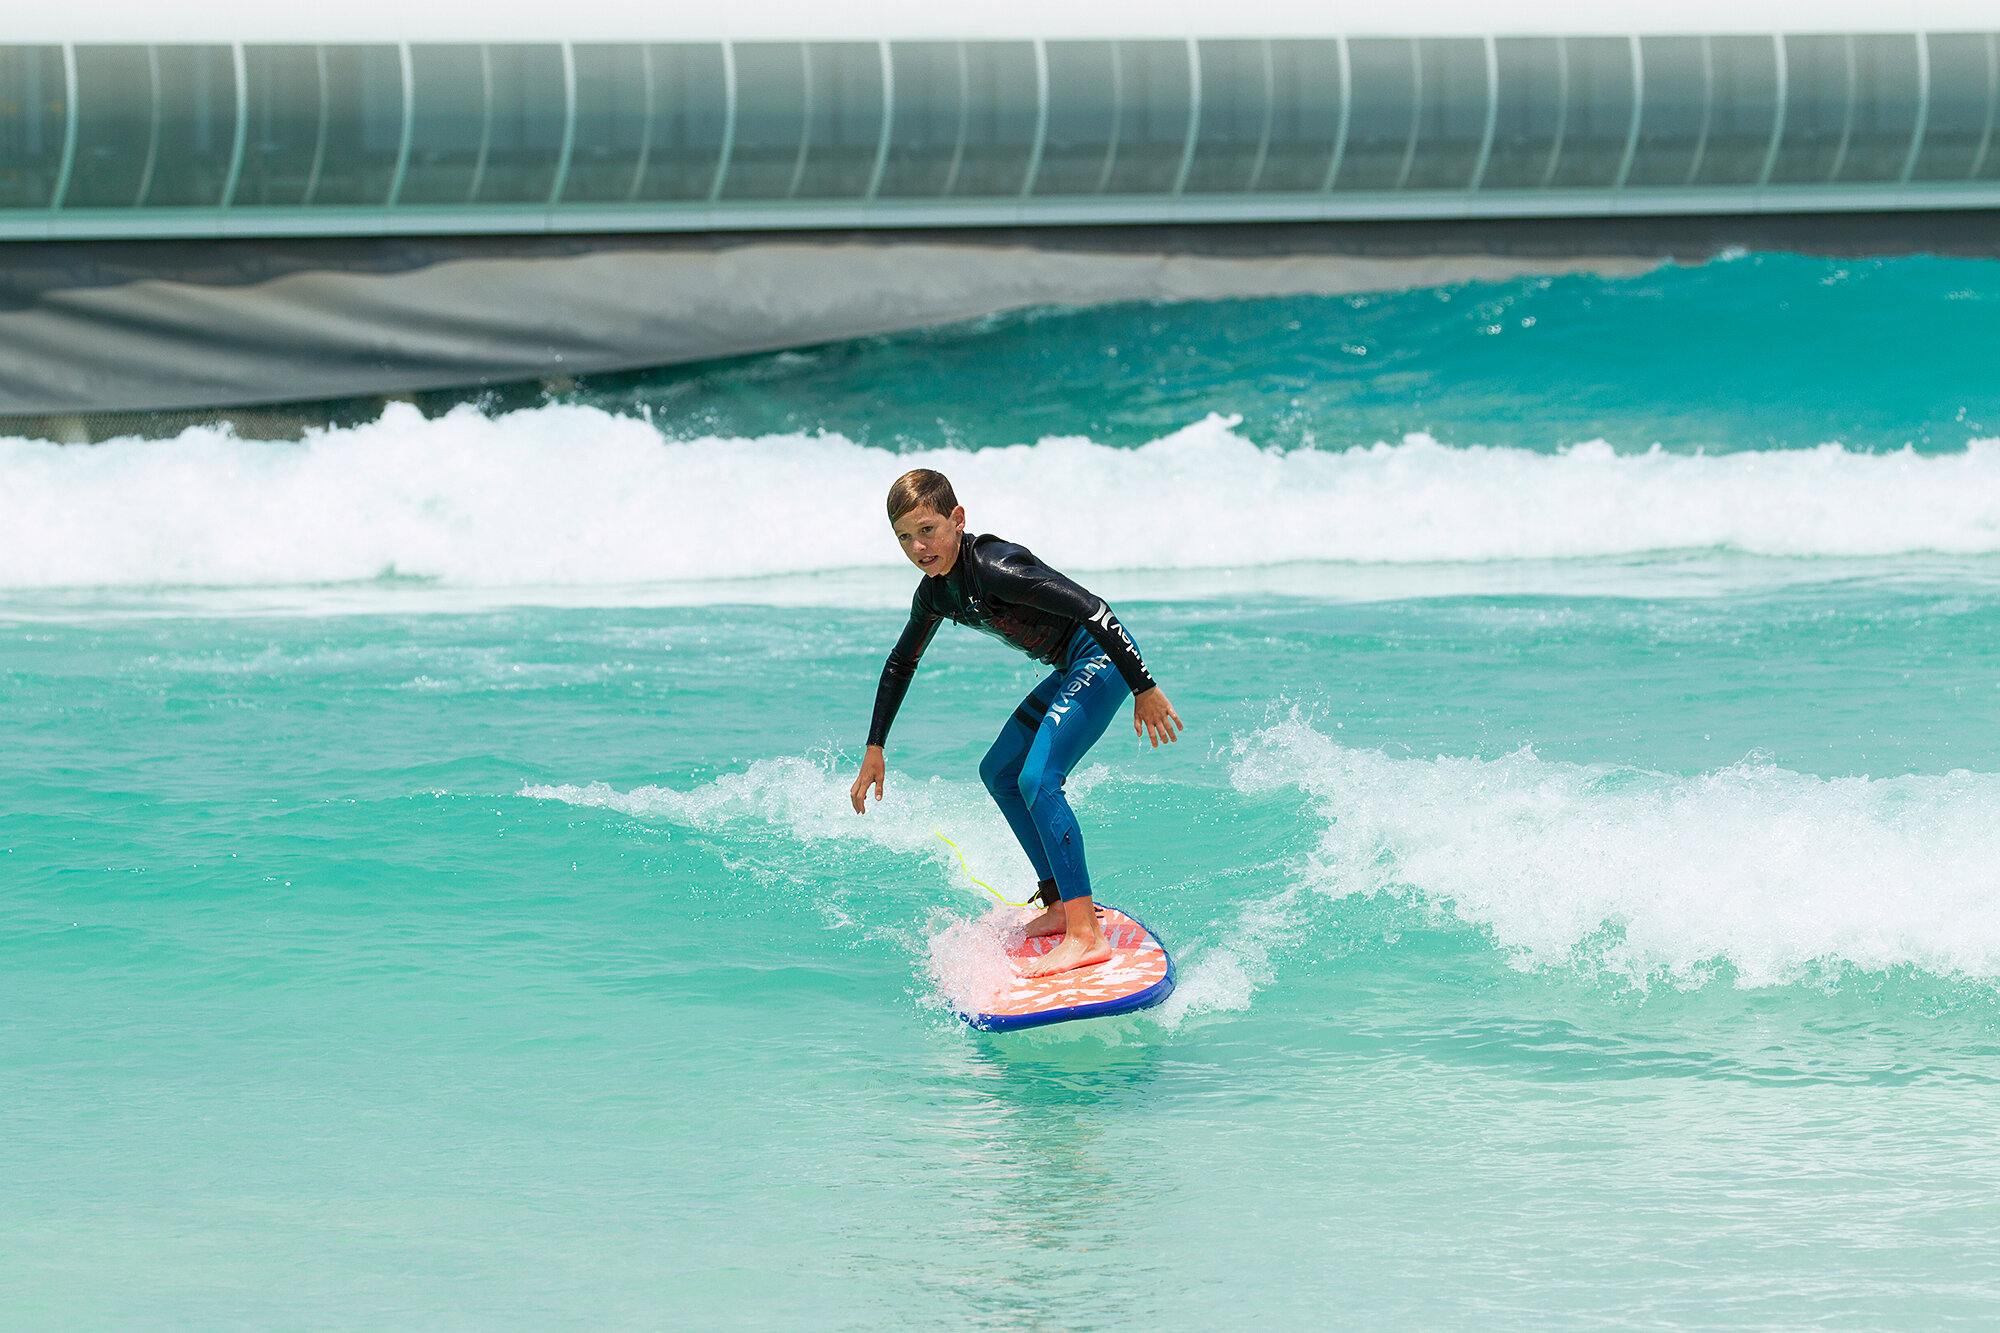   Andrew’s son Lochie has a crack at the Bay to celebrate the first day of surfing at UrbnSurf  